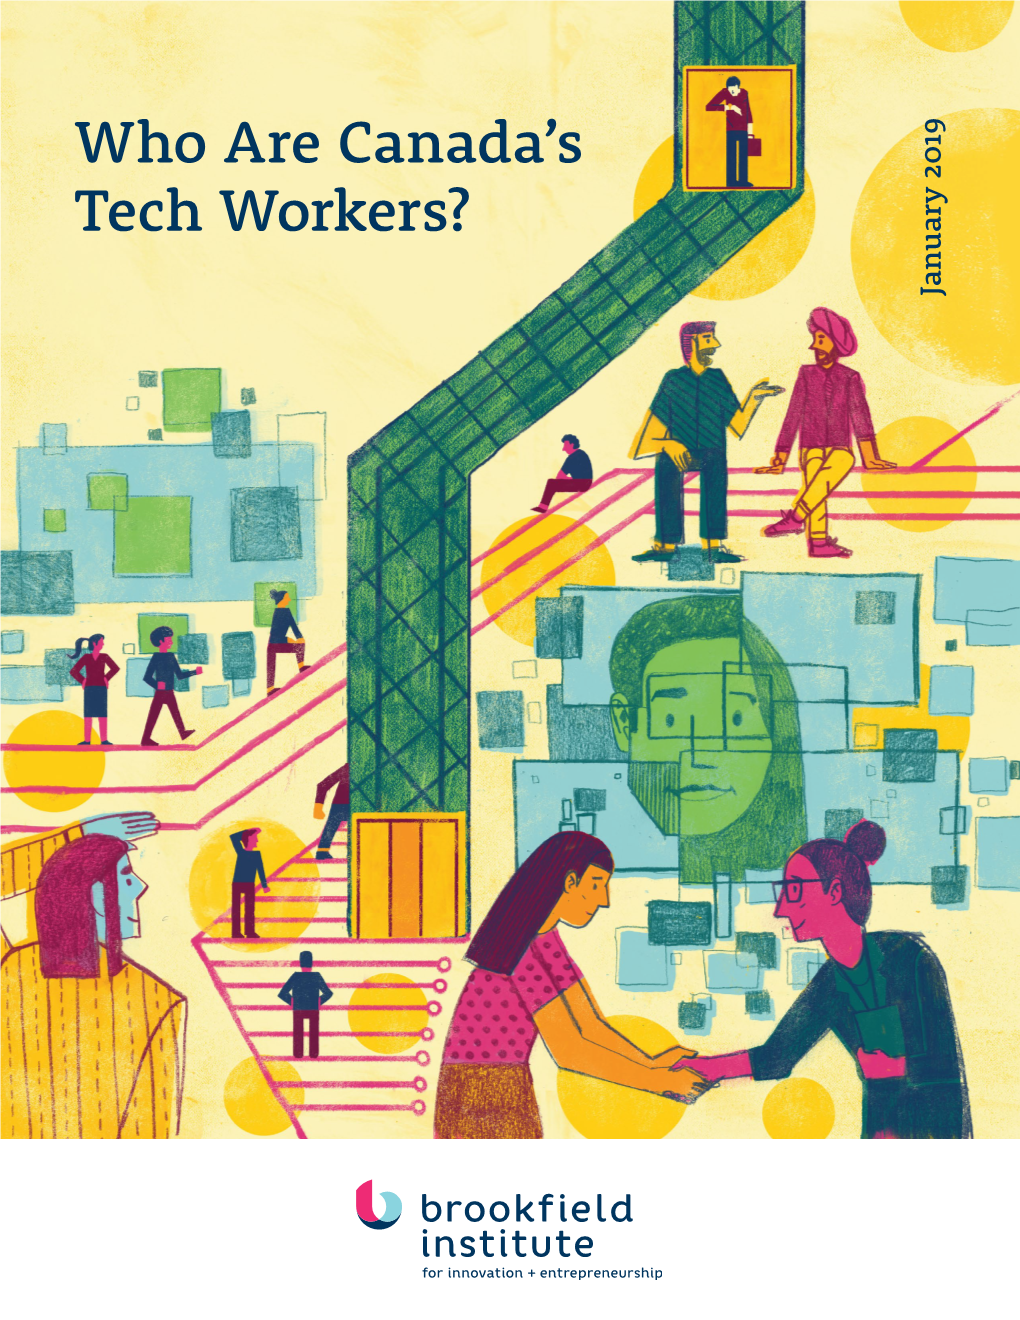 Who Are Canada's Tech Workers?